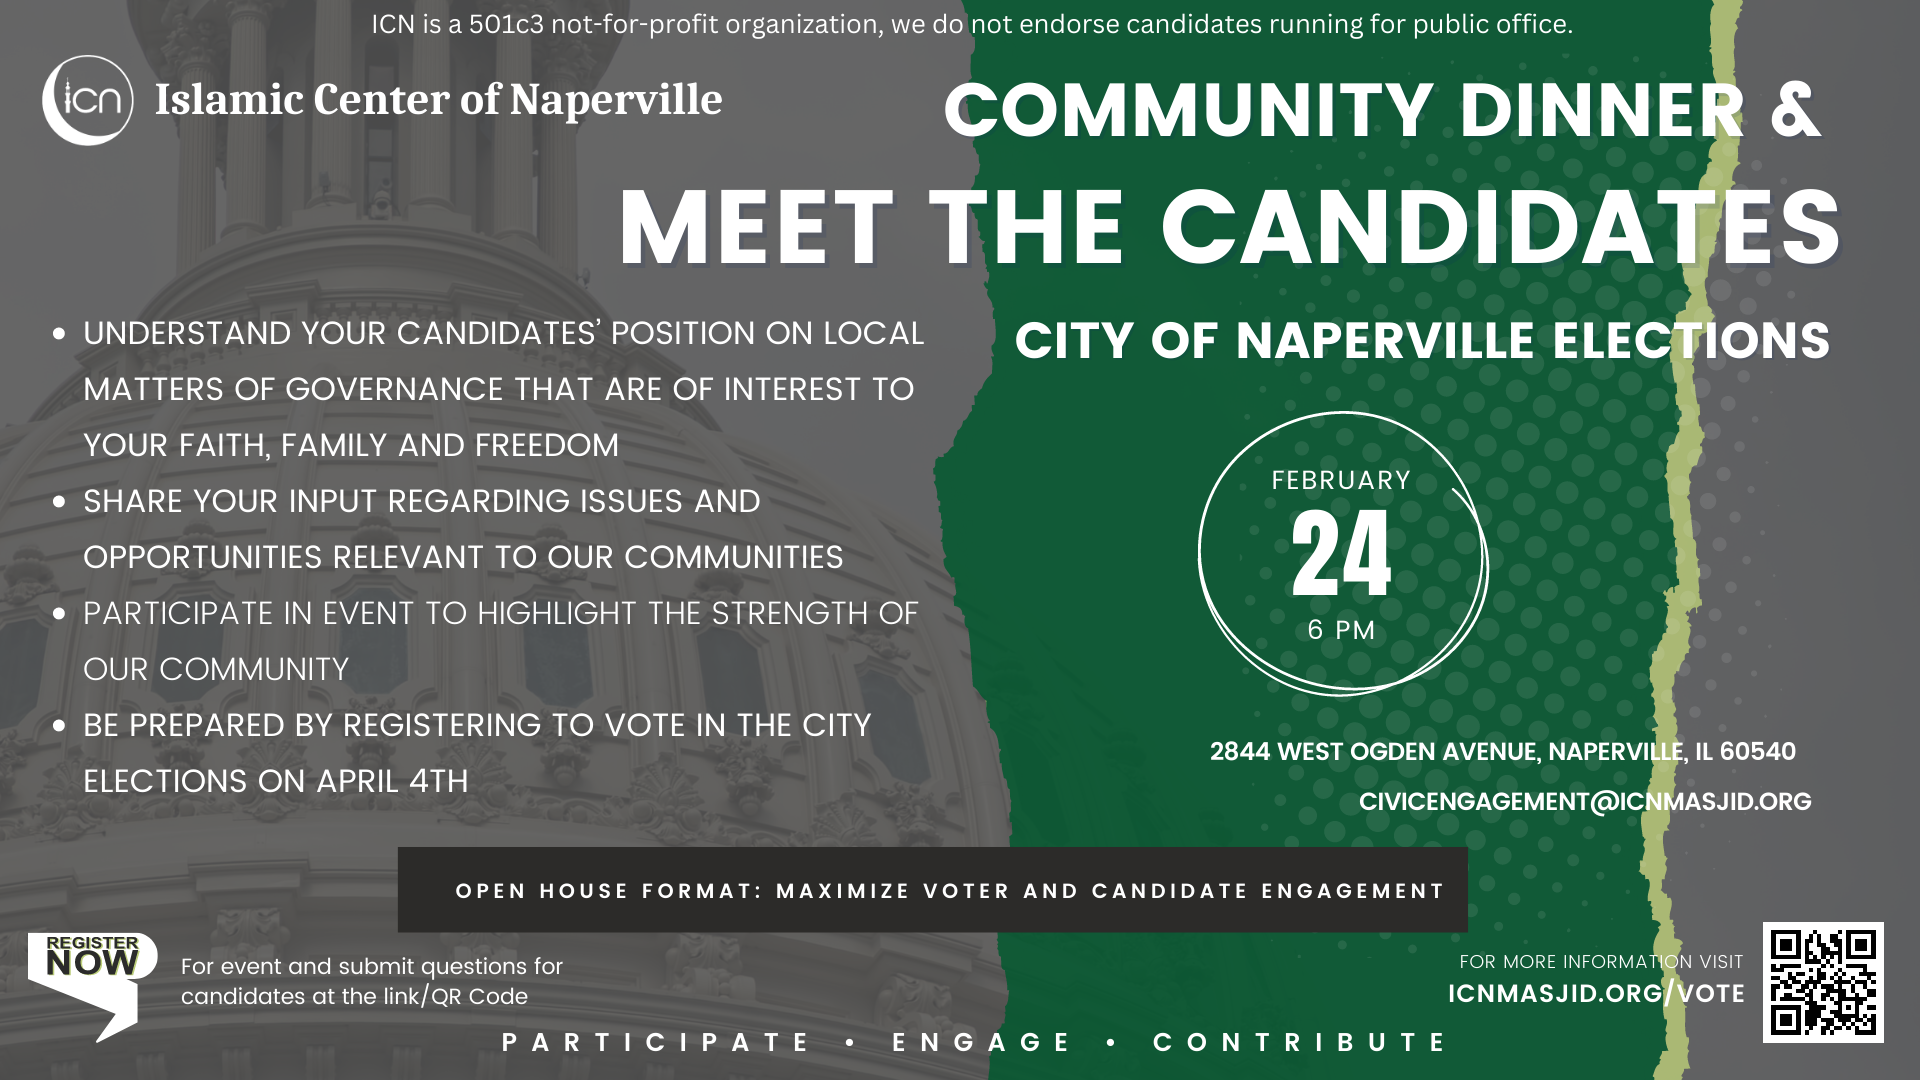 COMMUNITY DINNER & MEET THE CANDIDATES CITY OF NAPERVILLE ELECTIONS